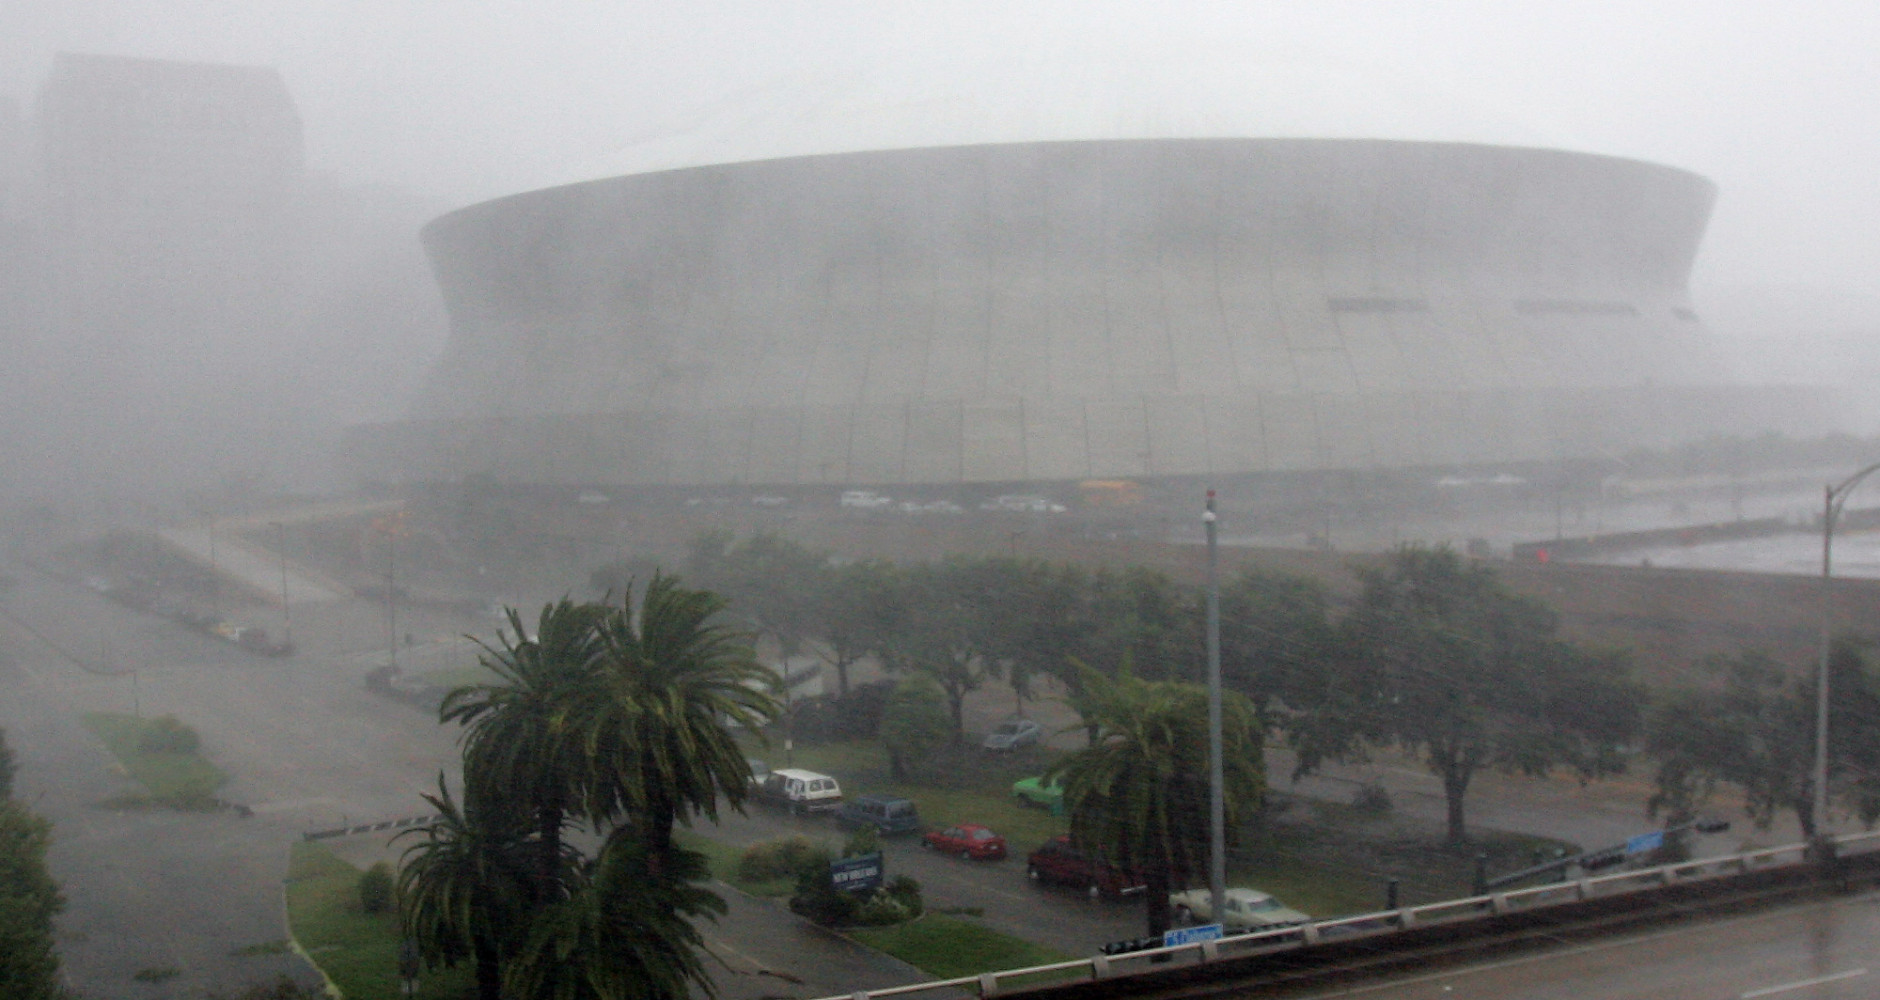 High winds and rain pound the Louisiana Superdome and New Orleans as Hurricane Katrina makes landfall along the Louisiana coast on Monday, Aug. 29, 2005. Officials report that part of the roof of the Superdome was blown off because of the storm and the facility, which is housing some 10,000 evacuees, is leaking.  (AP Photo/Dave Martin)